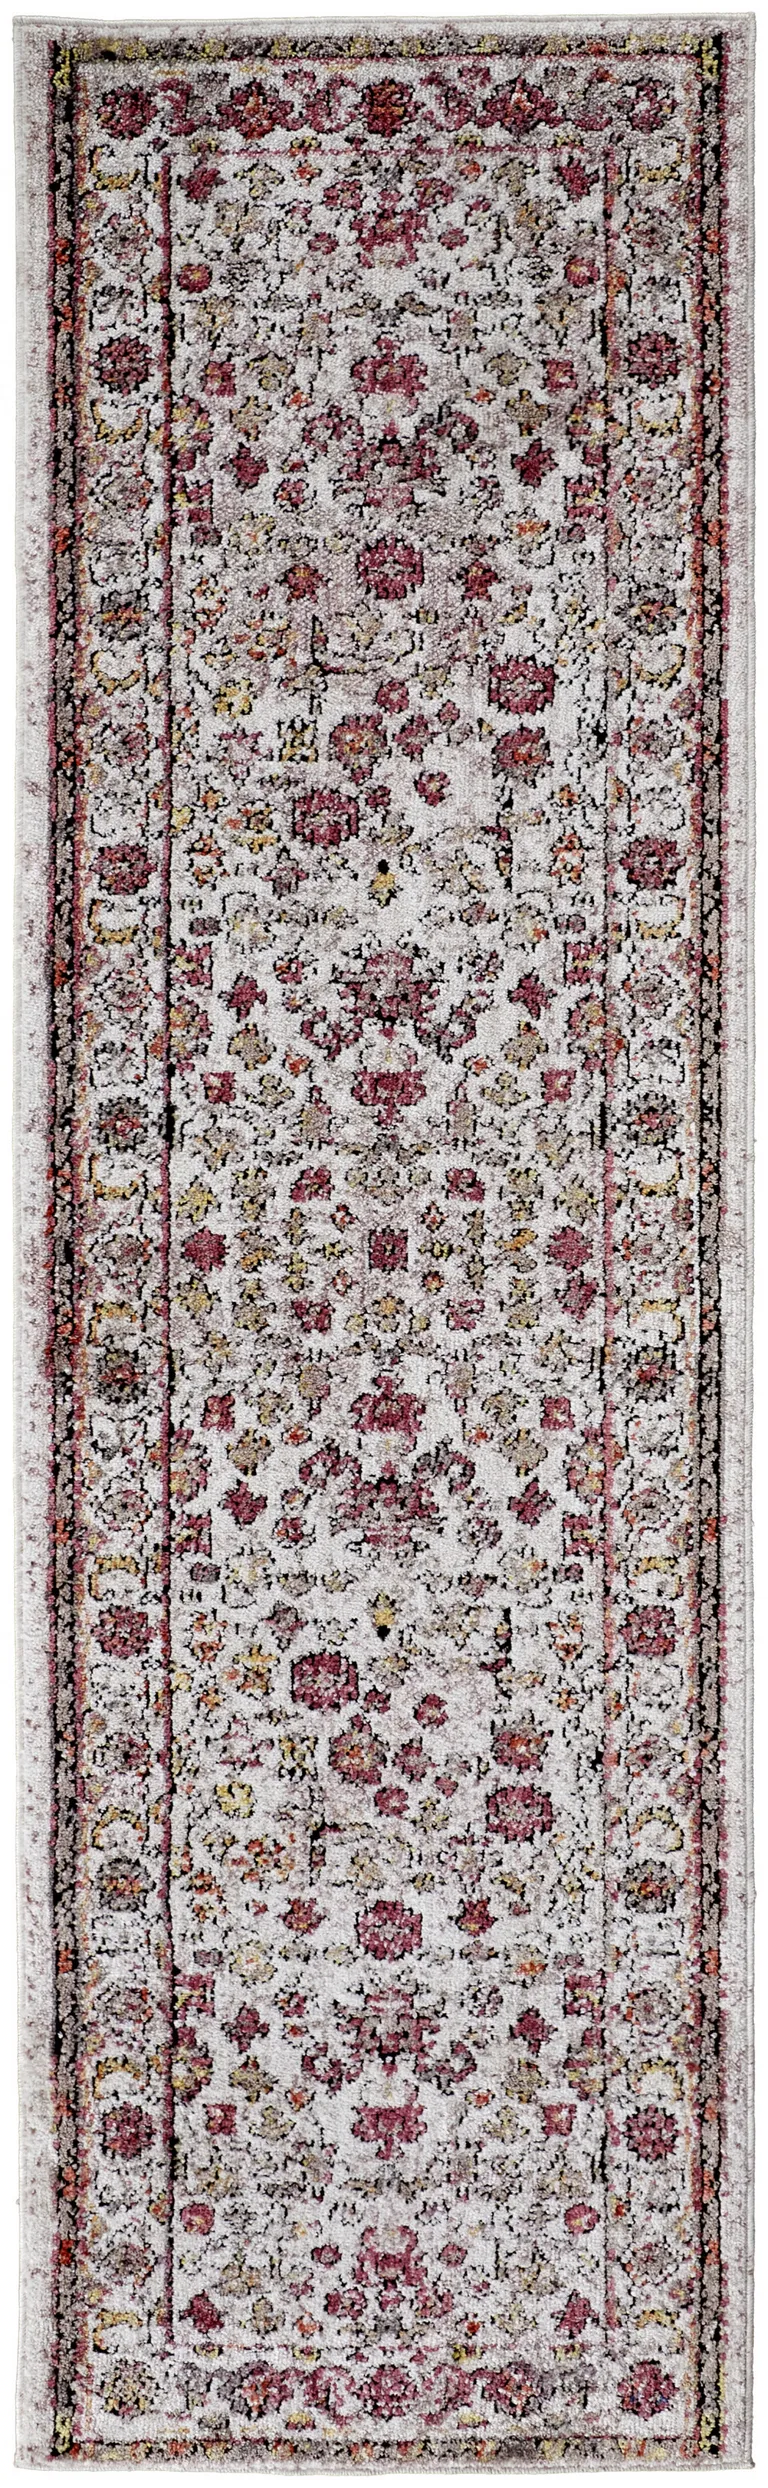 8' Ivory Pink And Gray Floral Stain Resistant Runner Rug Photo 1